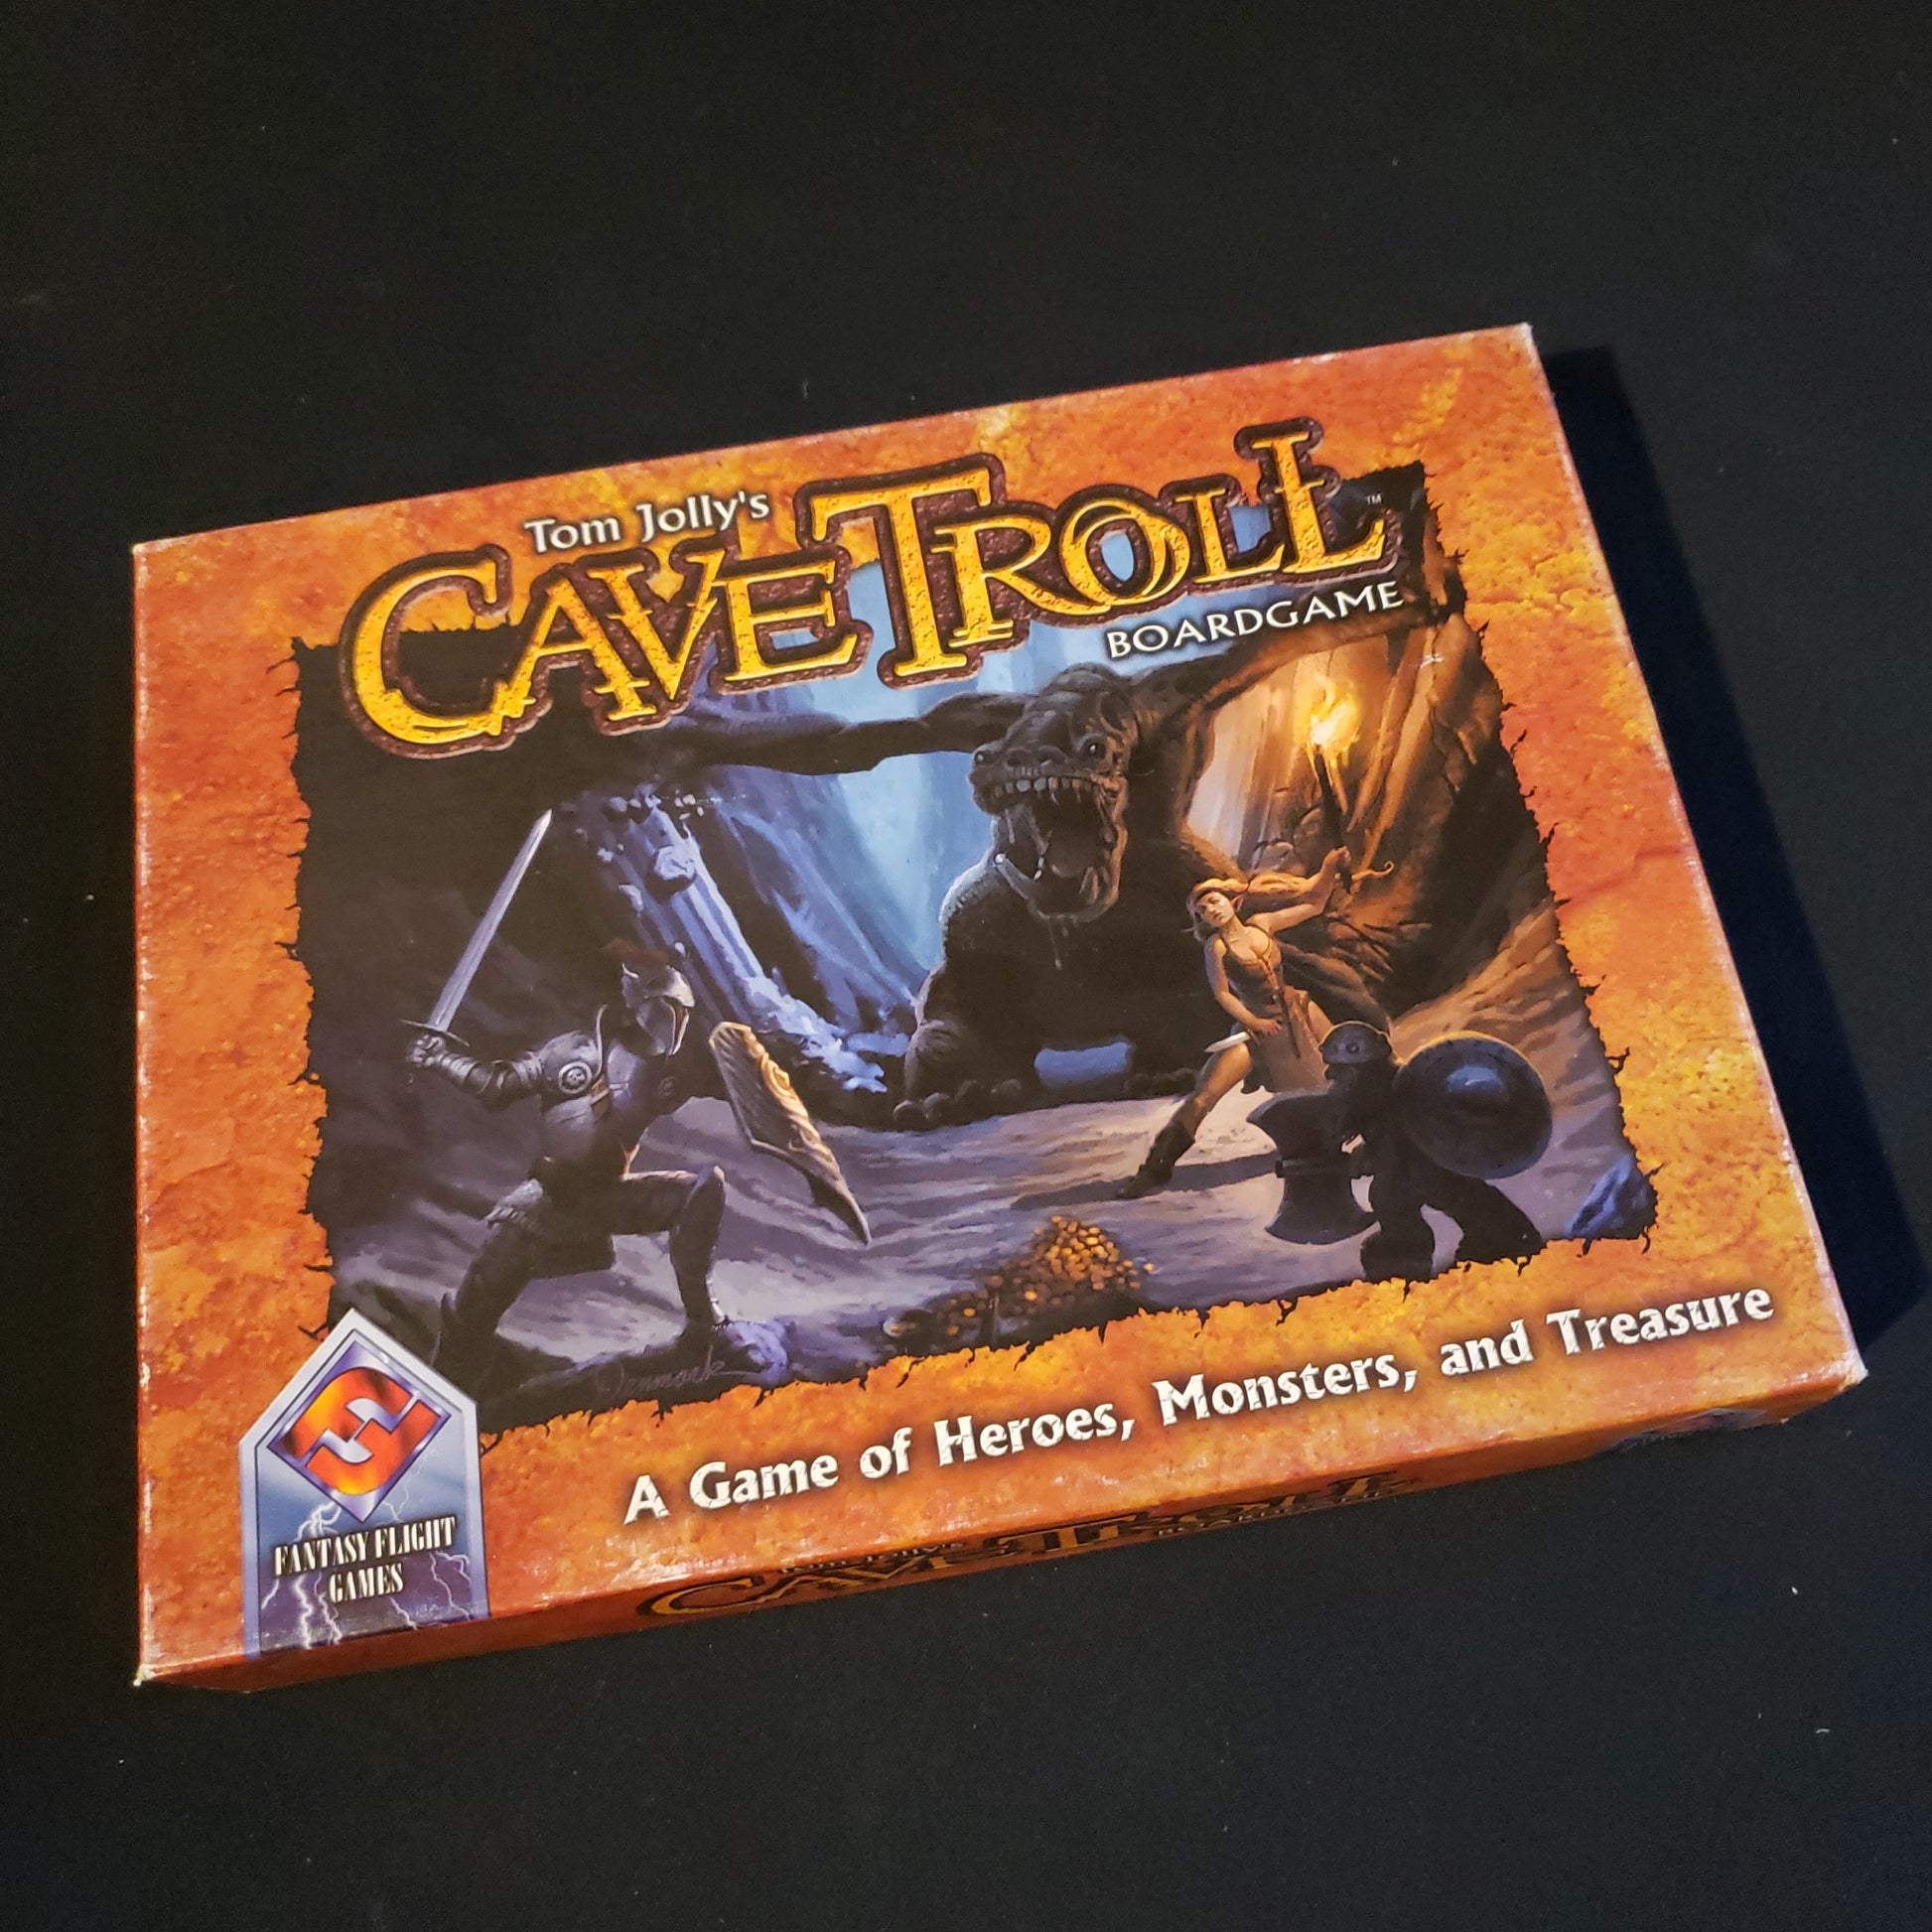 Image shows the front cover of the box of the Cave Troll board game